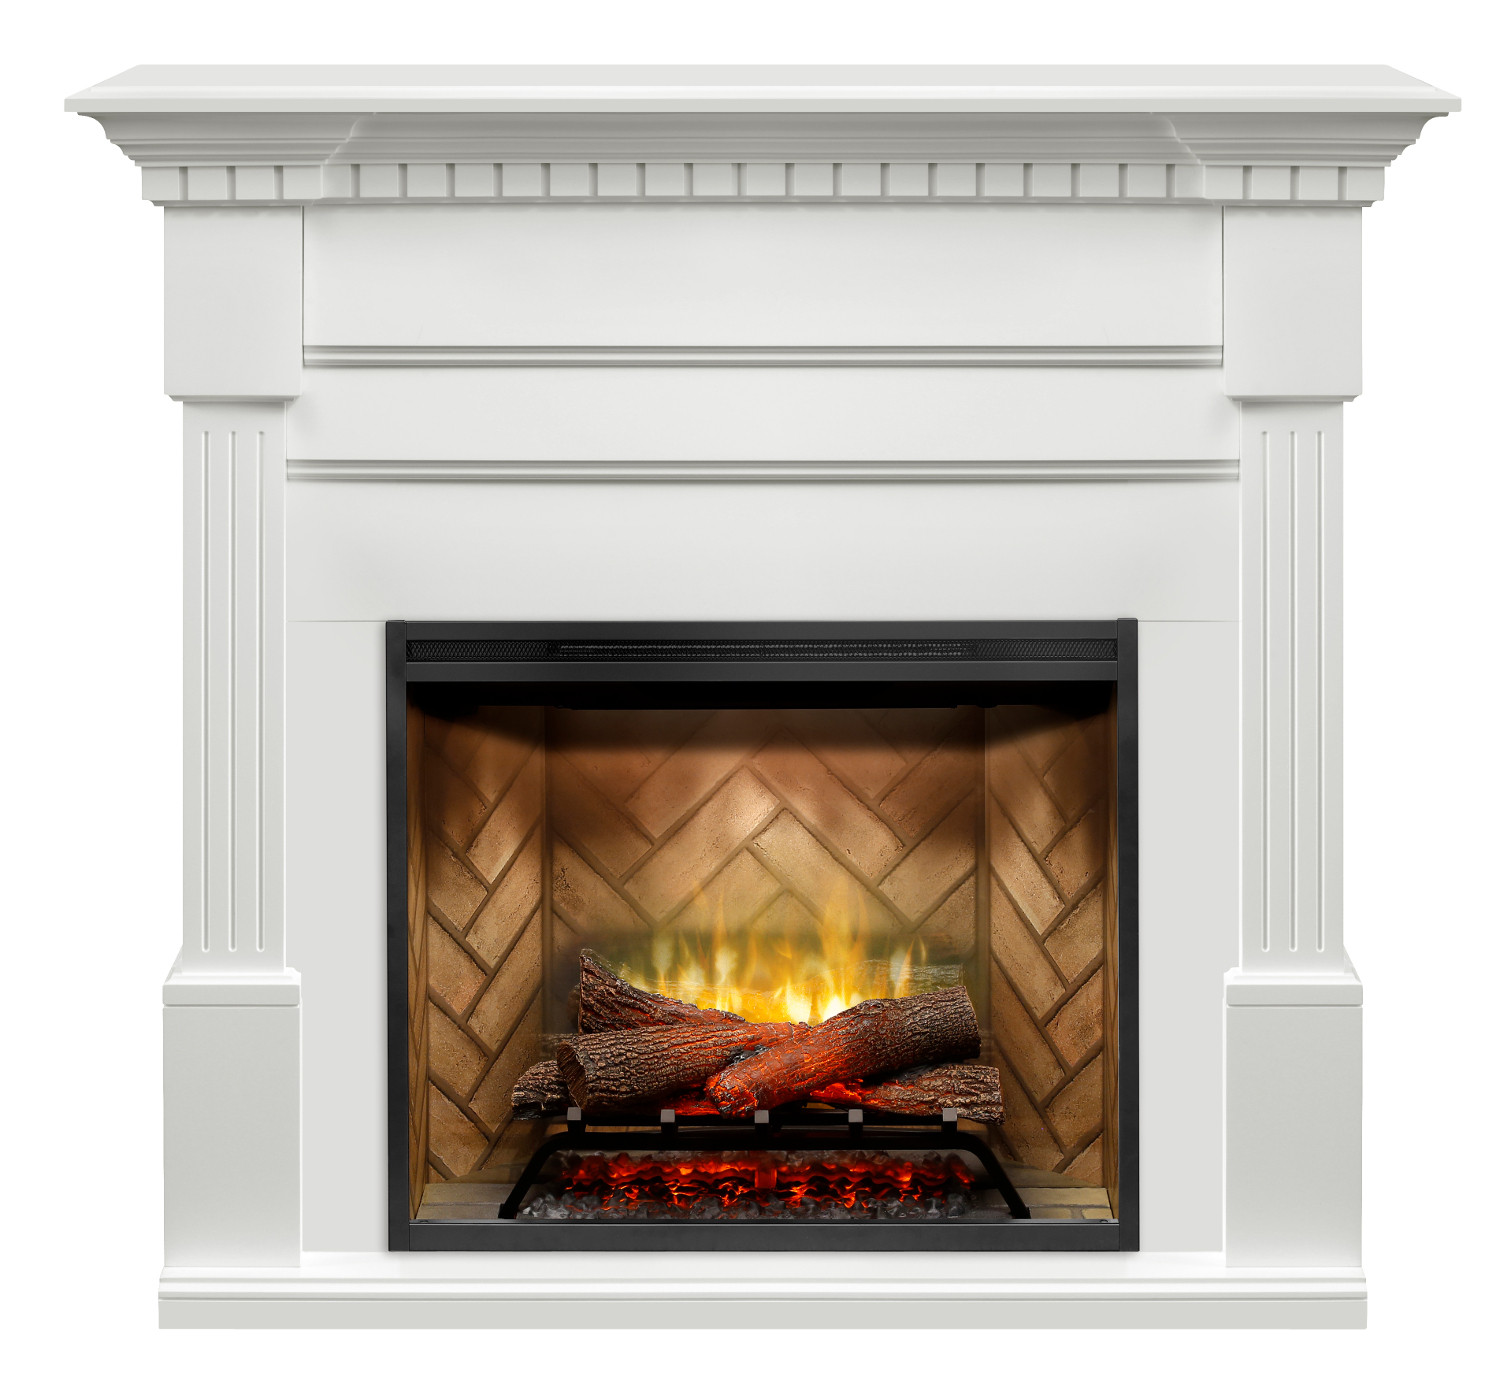 Dimplex White Electric Fireplace
 Dimplex Christina White Mantel with 30″ RBF30 Revillusion